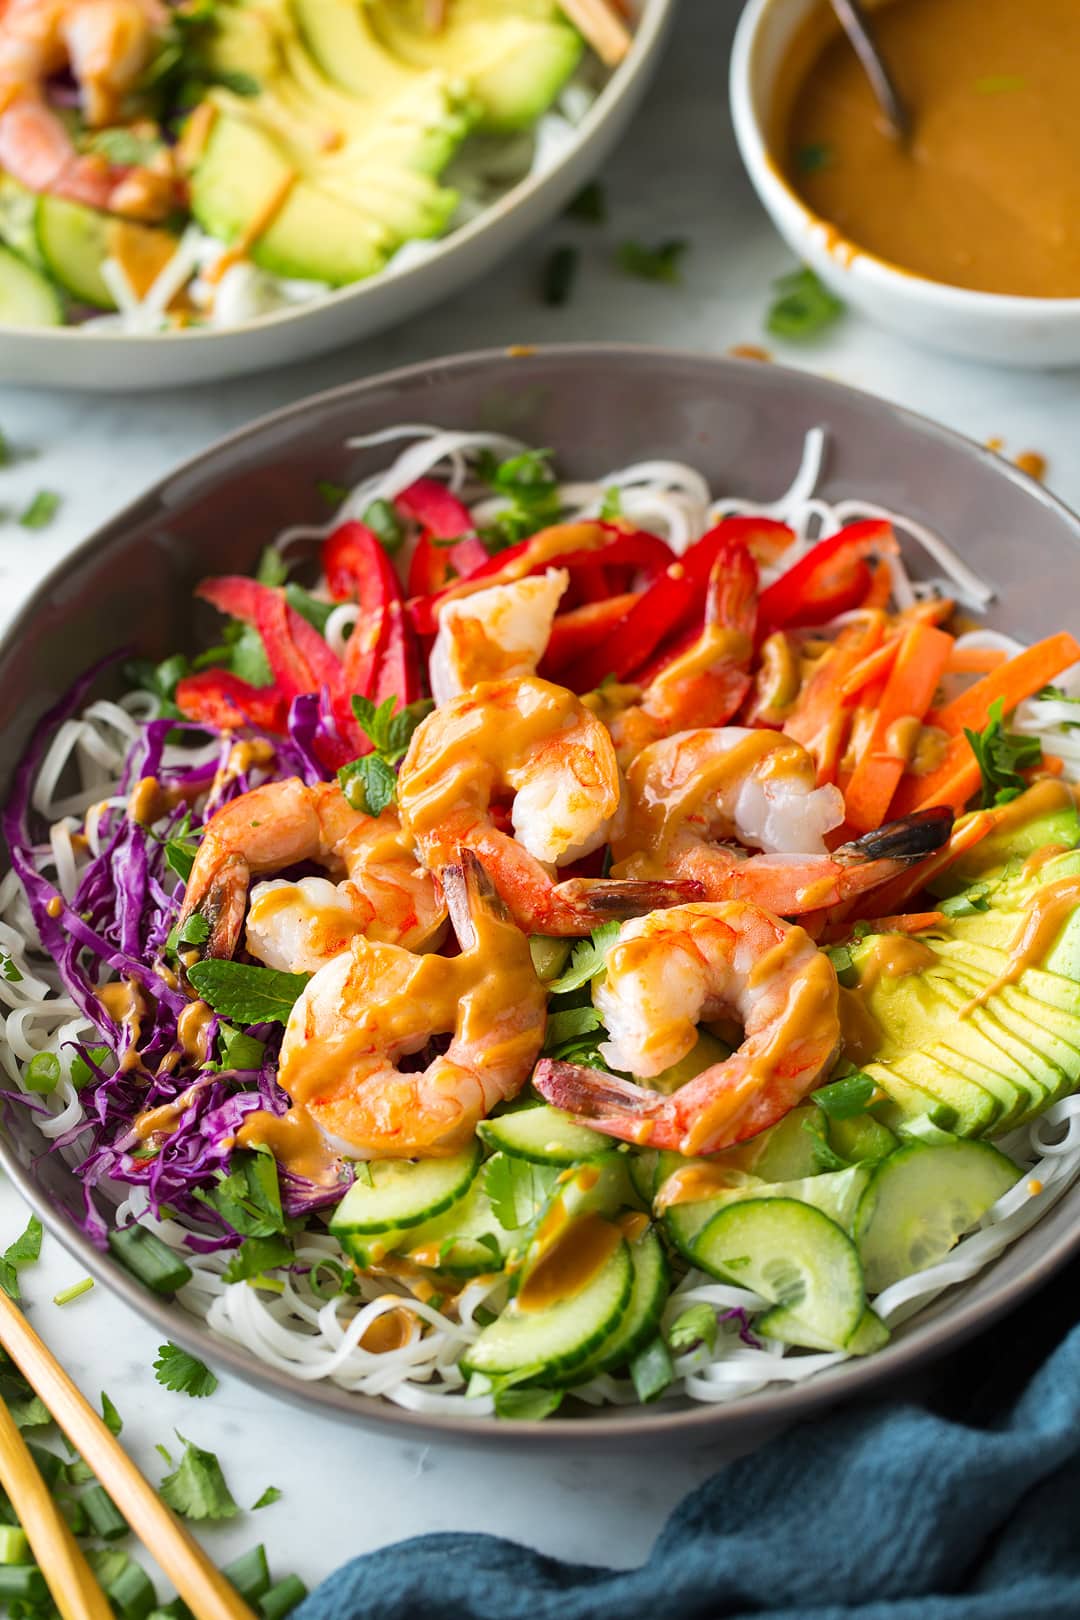 Rainbow Spring Roll Bowls with Shrimp or Chicken